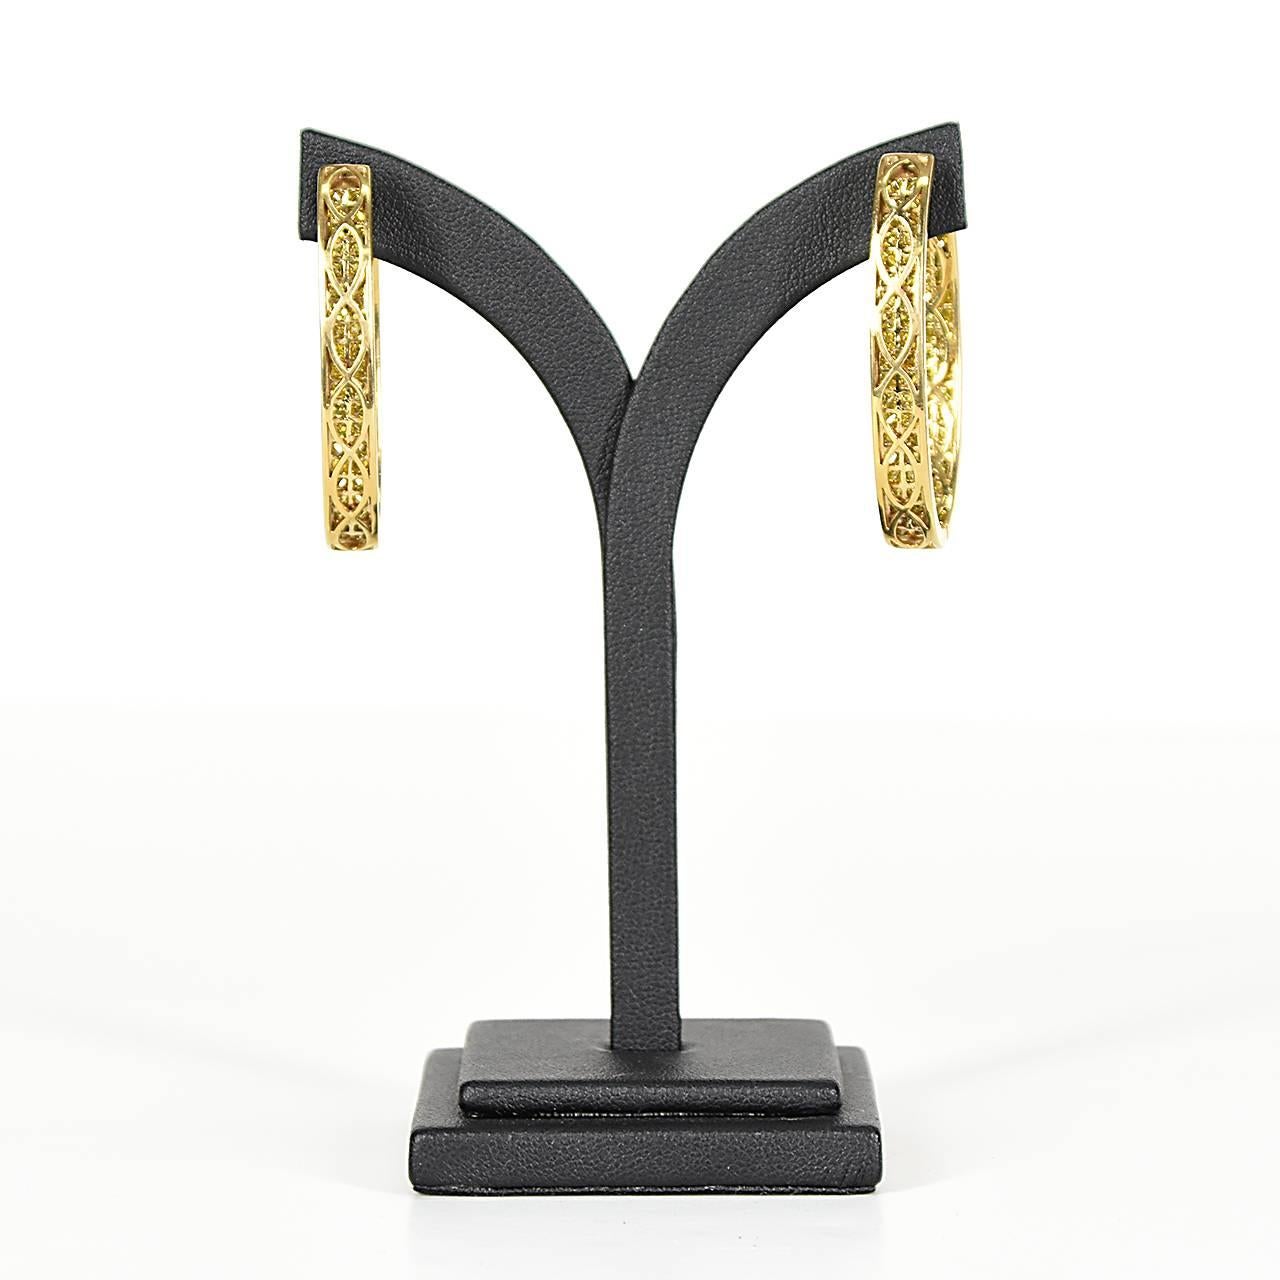 Pair of 18ct yellow gold oval shaped hinged diamond hoop earrings, set to fronts and reverse with square princess-cut yellow diamonds, total estimated weight 5.04ct. Diamond clarity : SI
Independent valuation in Australian dollars